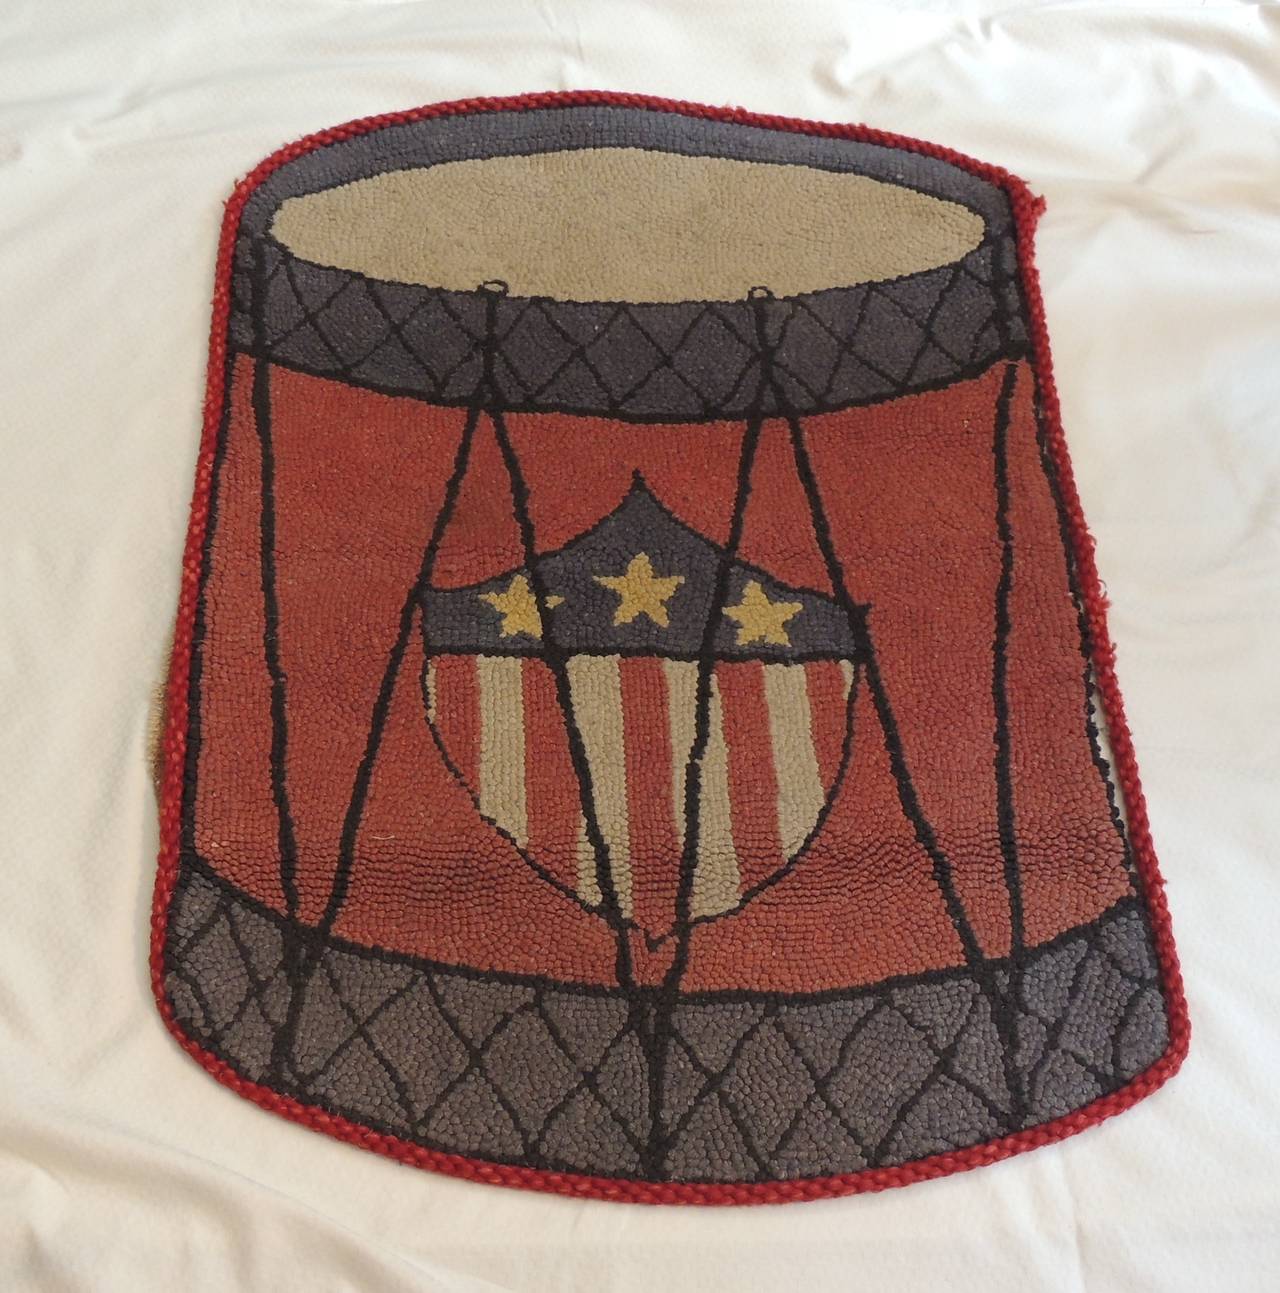 This item is part of our 7Th Anniversary SALE:
Vintage drum hook rug. With USA flag details. In shades of red, natural, grey, blue and yellow.
Rug hooking is both an art and a craft where rugs are made by pulling loops of yarn or fabric through a